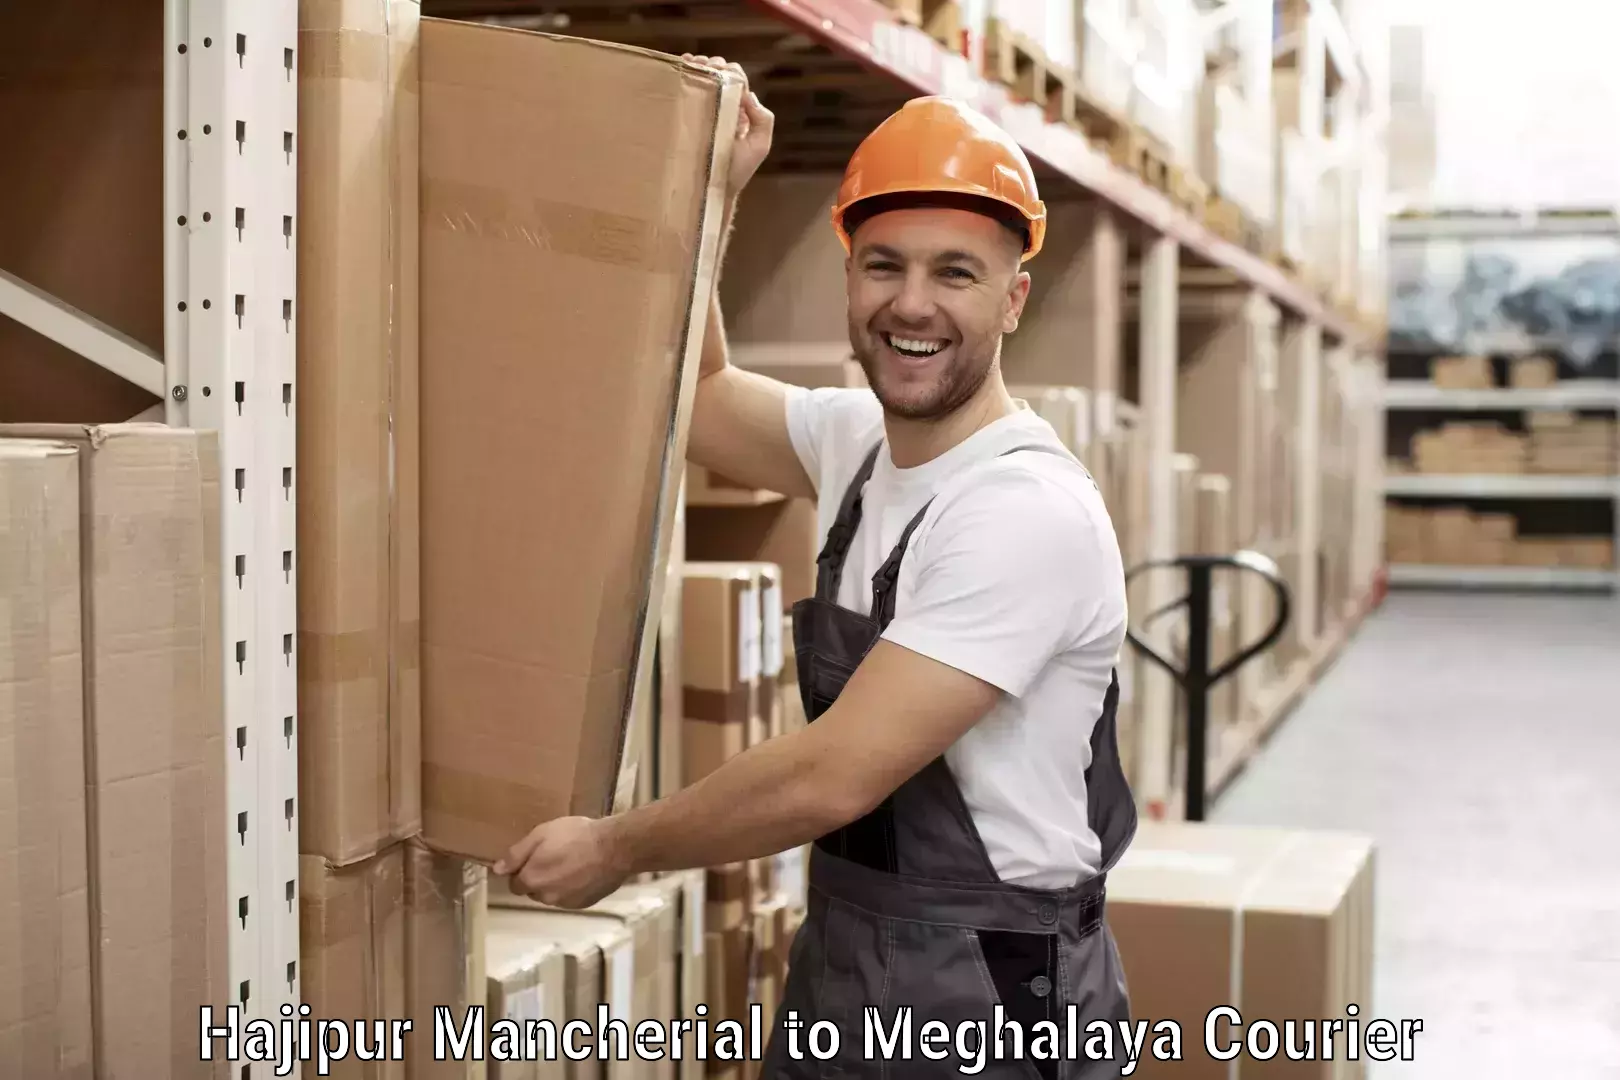 Express package delivery Hajipur Mancherial to Meghalaya